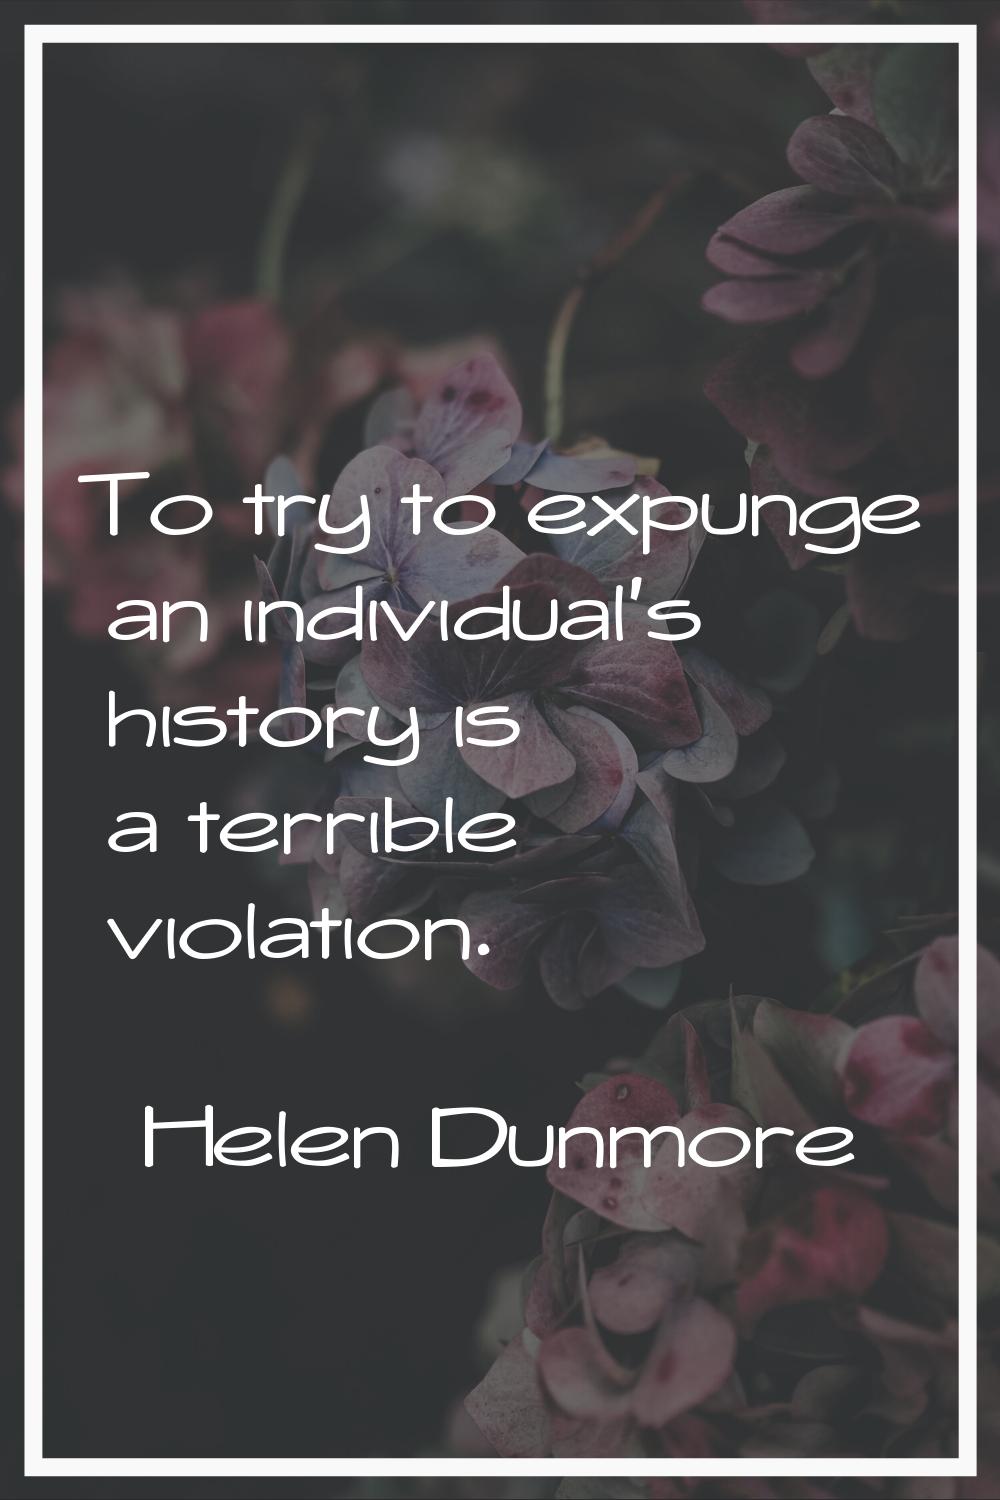 To try to expunge an individual's history is a terrible violation.